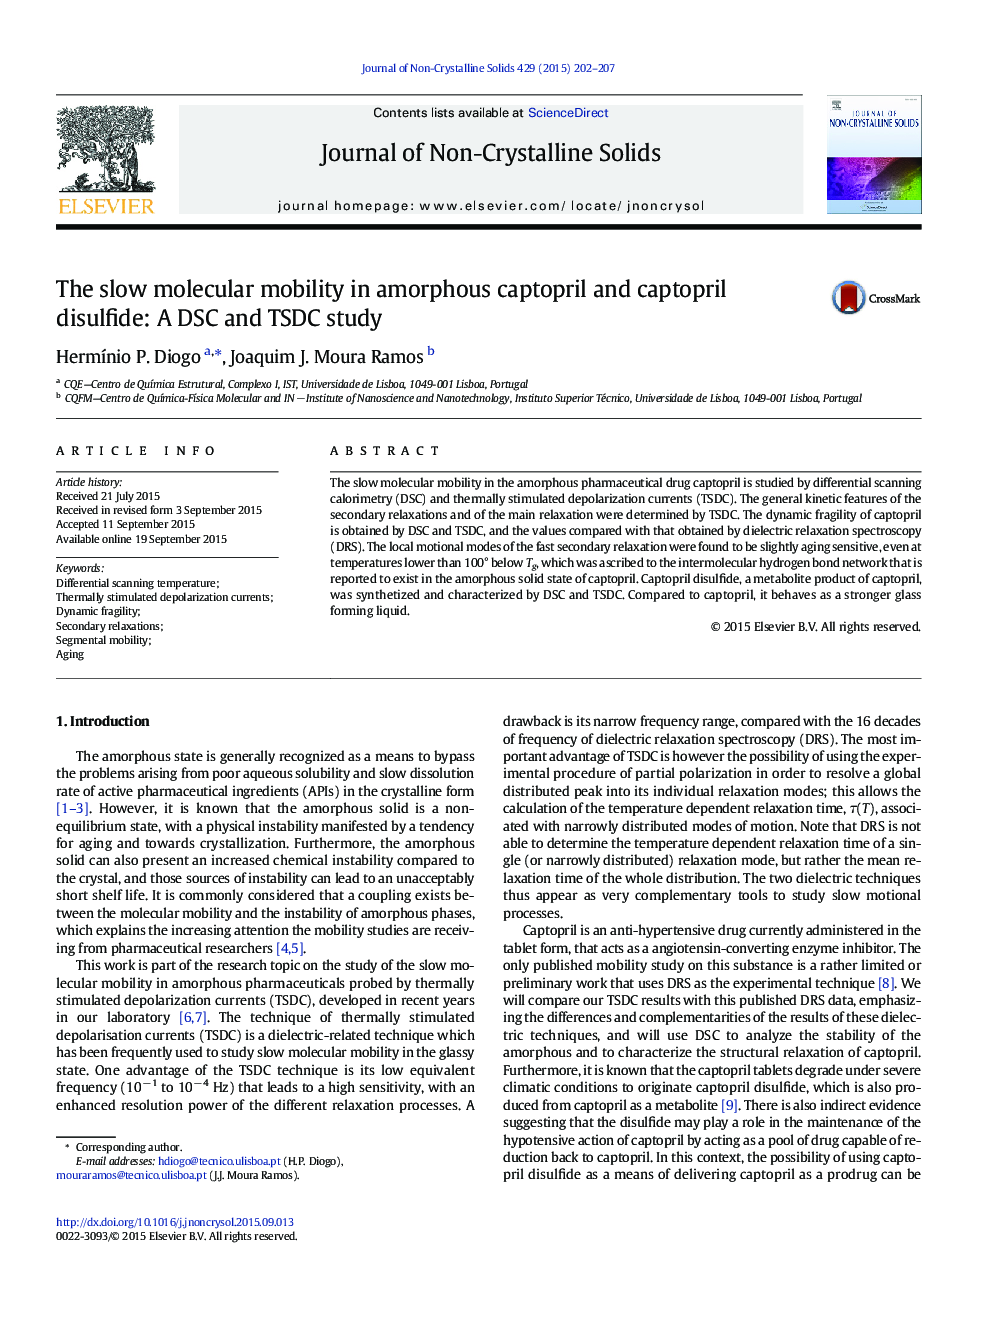 The slow molecular mobility in amorphous captopril and captopril disulfide: A DSC and TSDC study